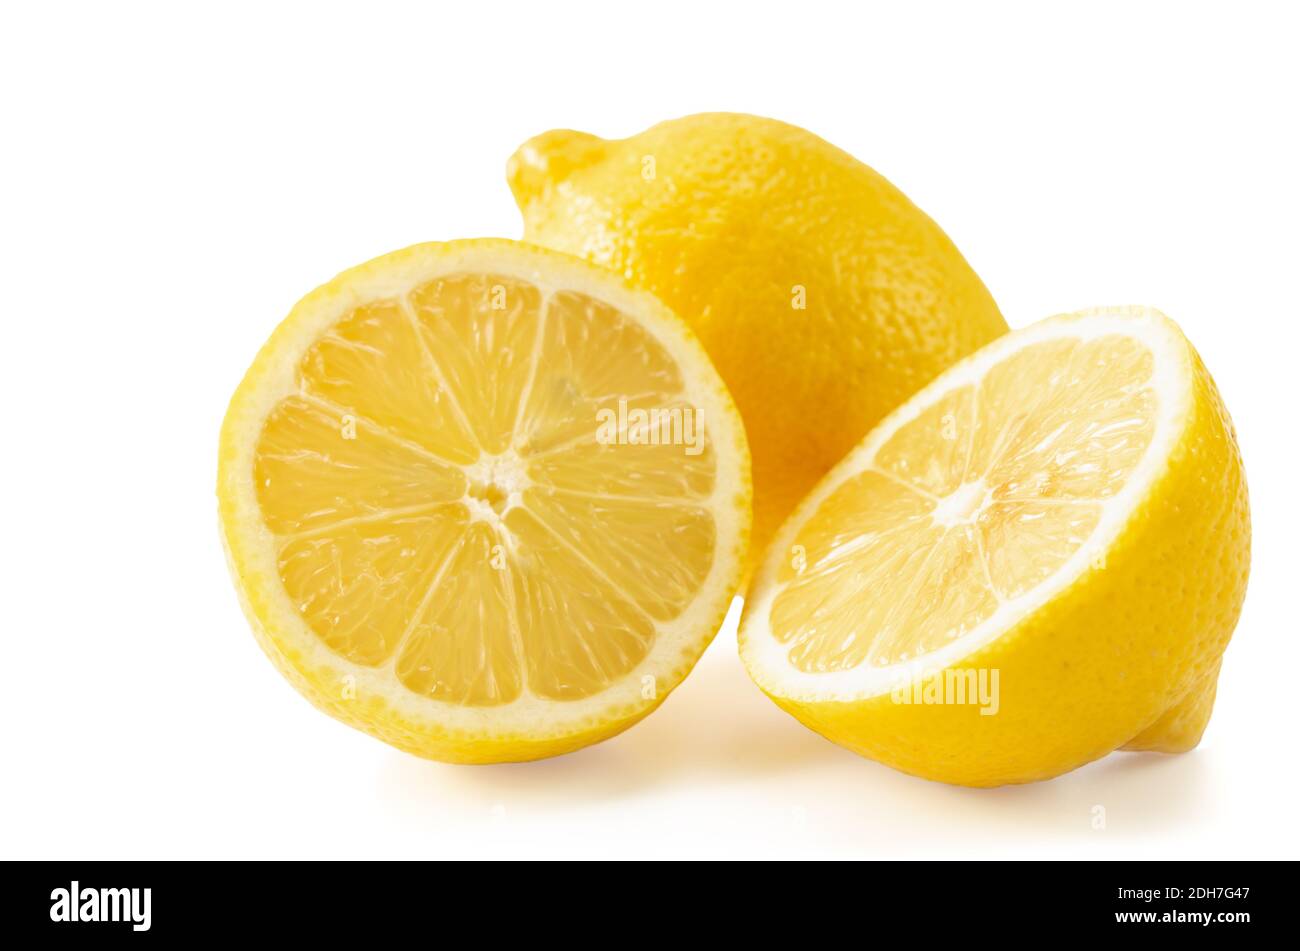 lemon fruits on a white background, blank for your photo manipulations Stock Photo